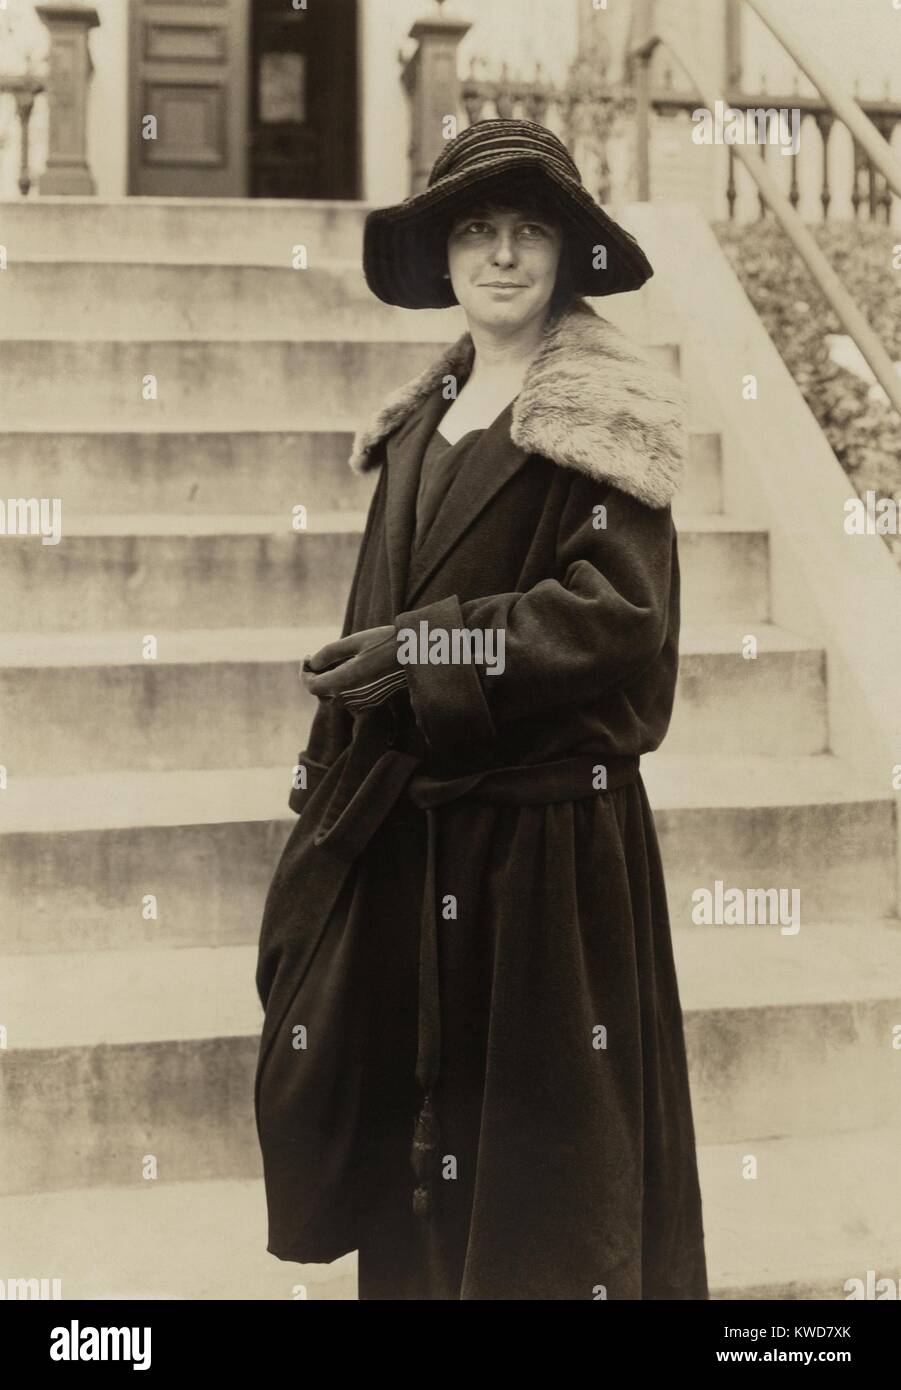 Suffrage activist and feminist Anita Pollitzer, ca. 1916-23. She introduced her friend Georgia O'Keeffe to Alfred Stieglitz in 1916. (BSLOC 2015 16 200) Stock Photo